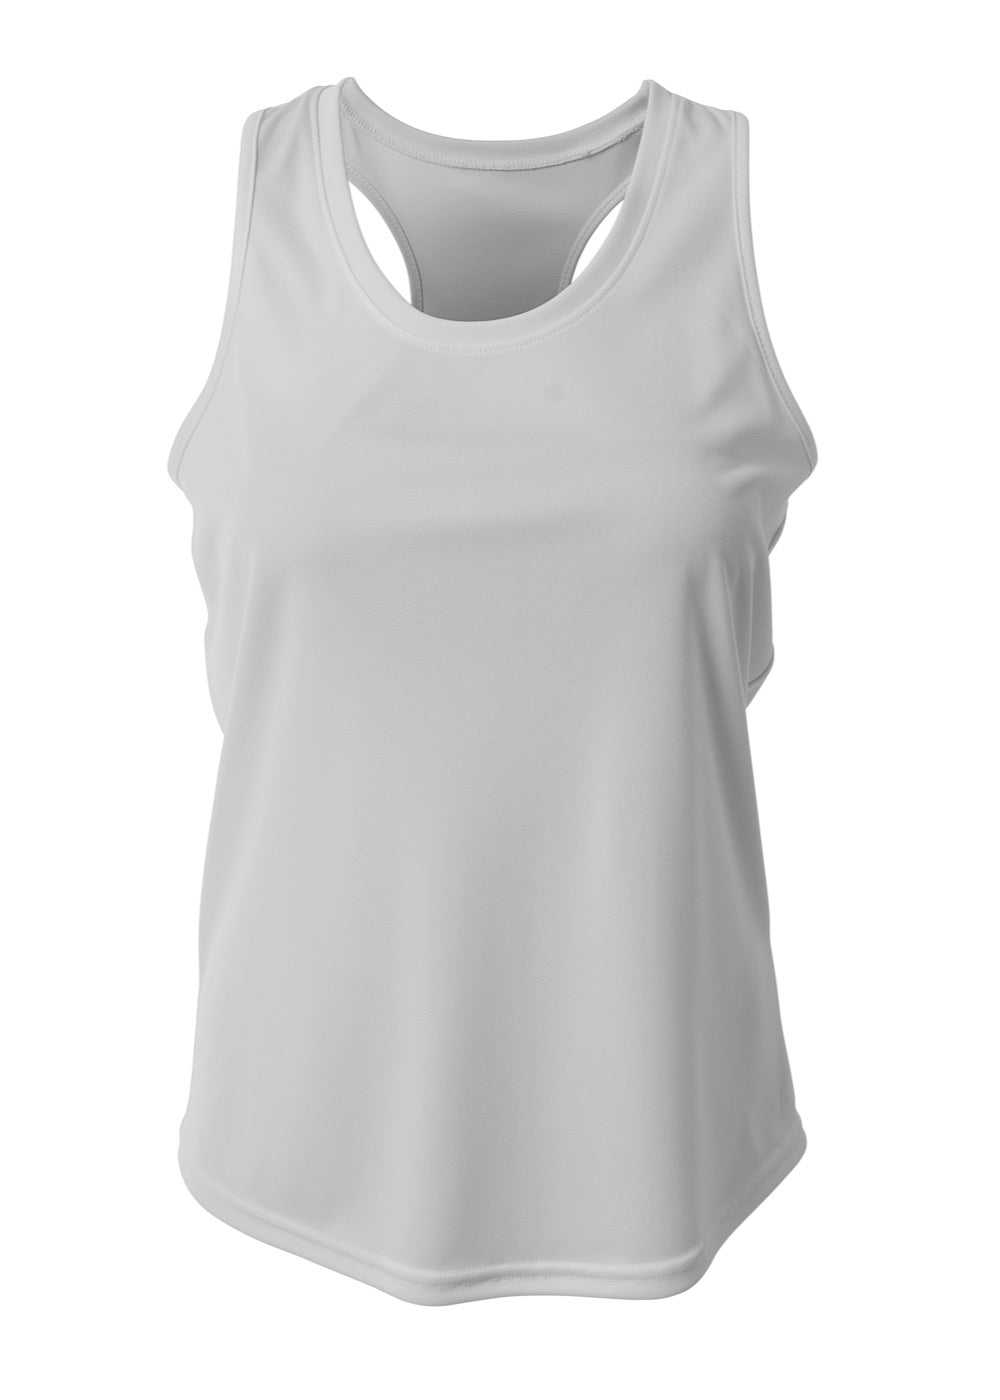 A4 NW1179 Athletic Racerback Woman's Tank - Silver - HIT a Double